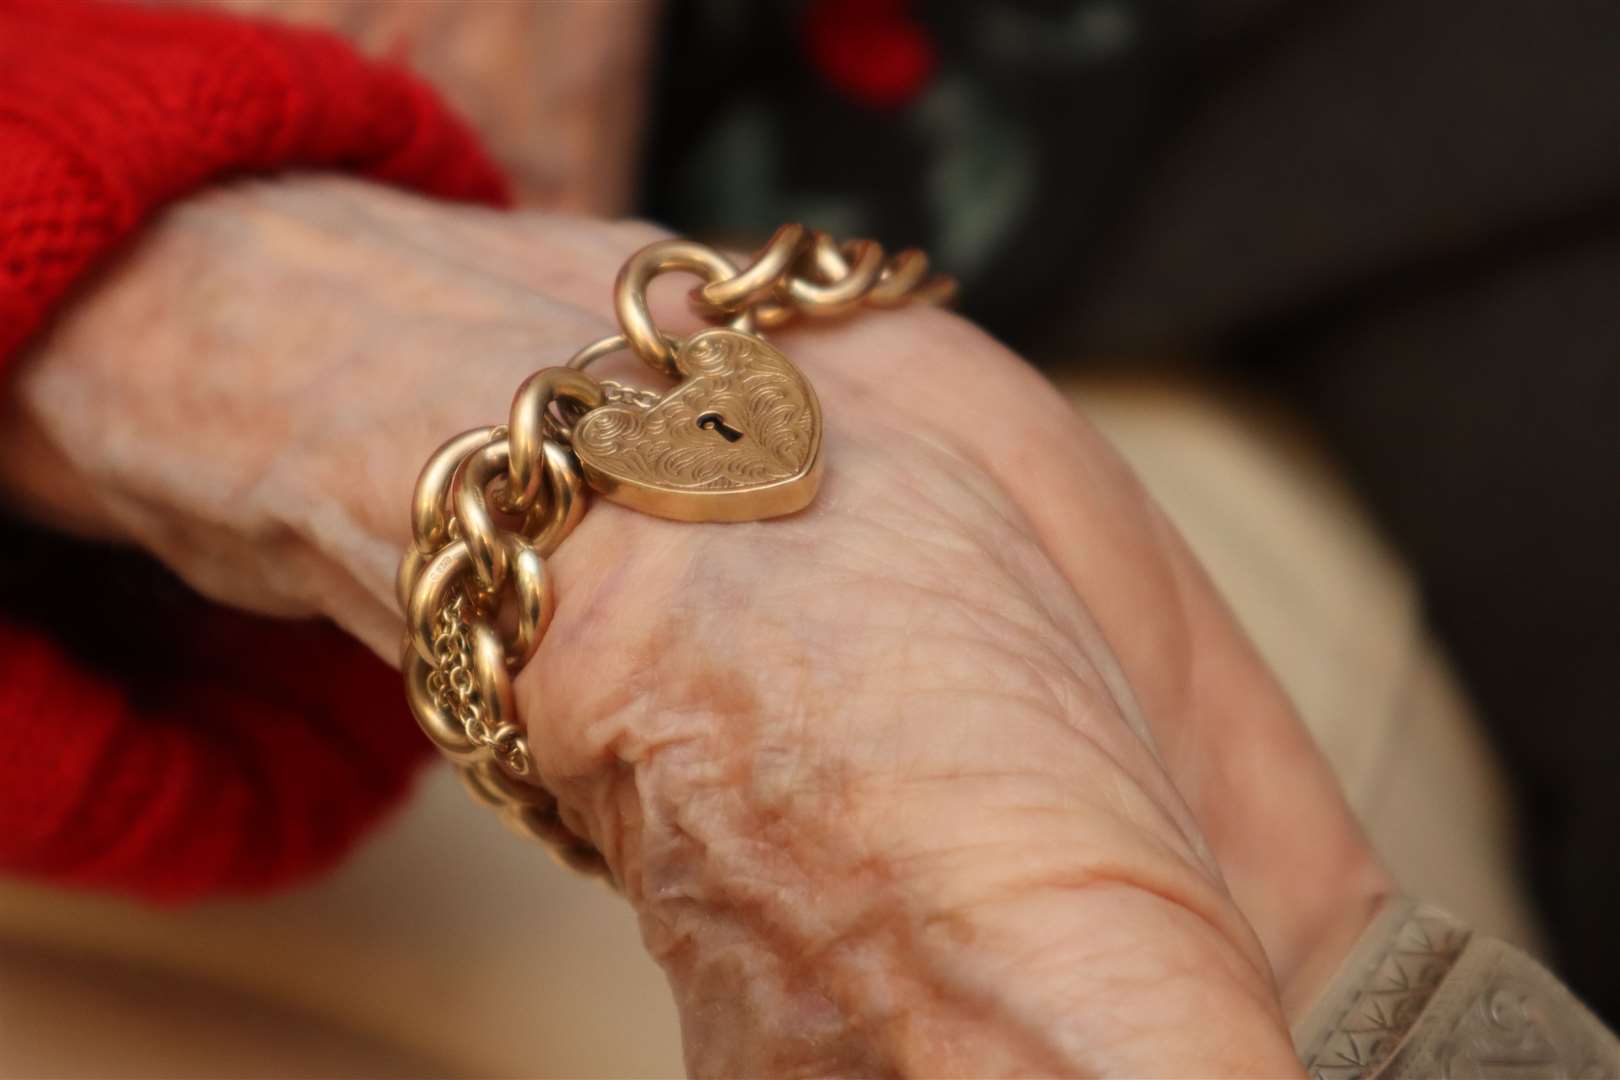 This is similar to the gold heart-shaped padlock Kathy Martin of Minster, Sheppey, says she has lost